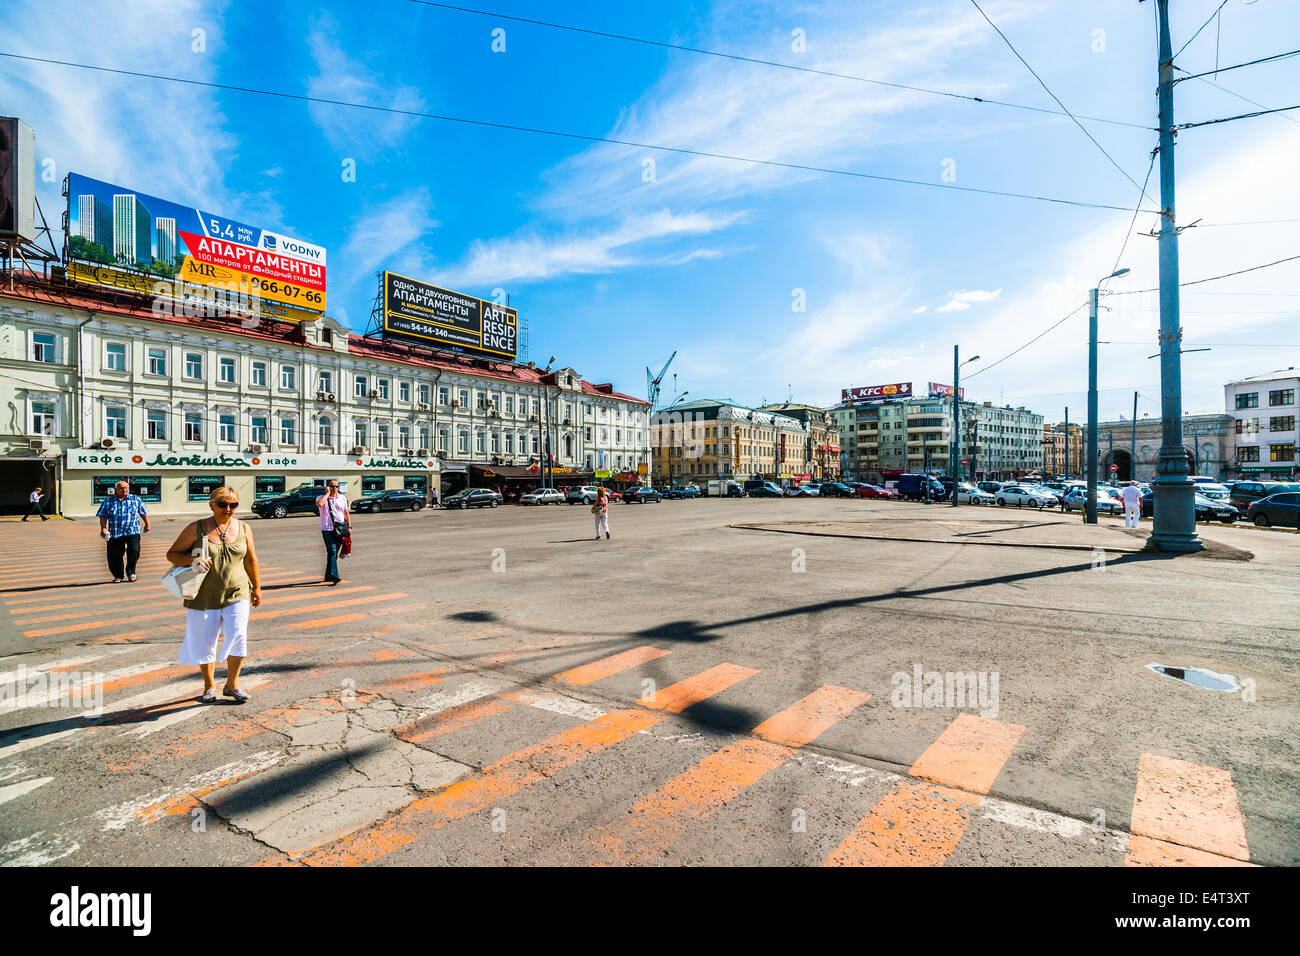 People in Tverskaya Zastava (outpost or toll-gate) Square of Moscow Stock Photo